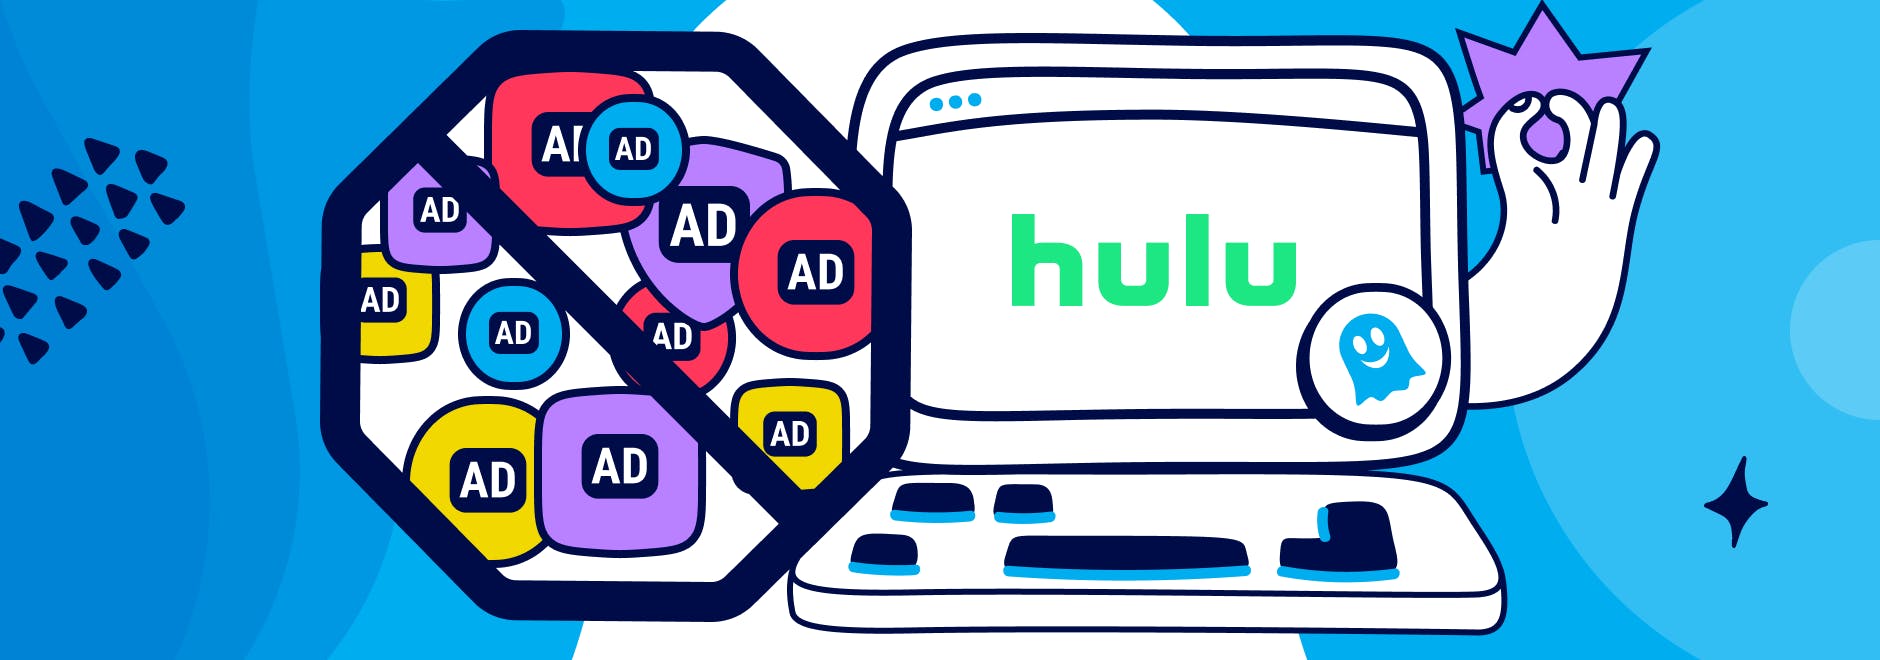 How to Block Ads on Hulu with Ghostery